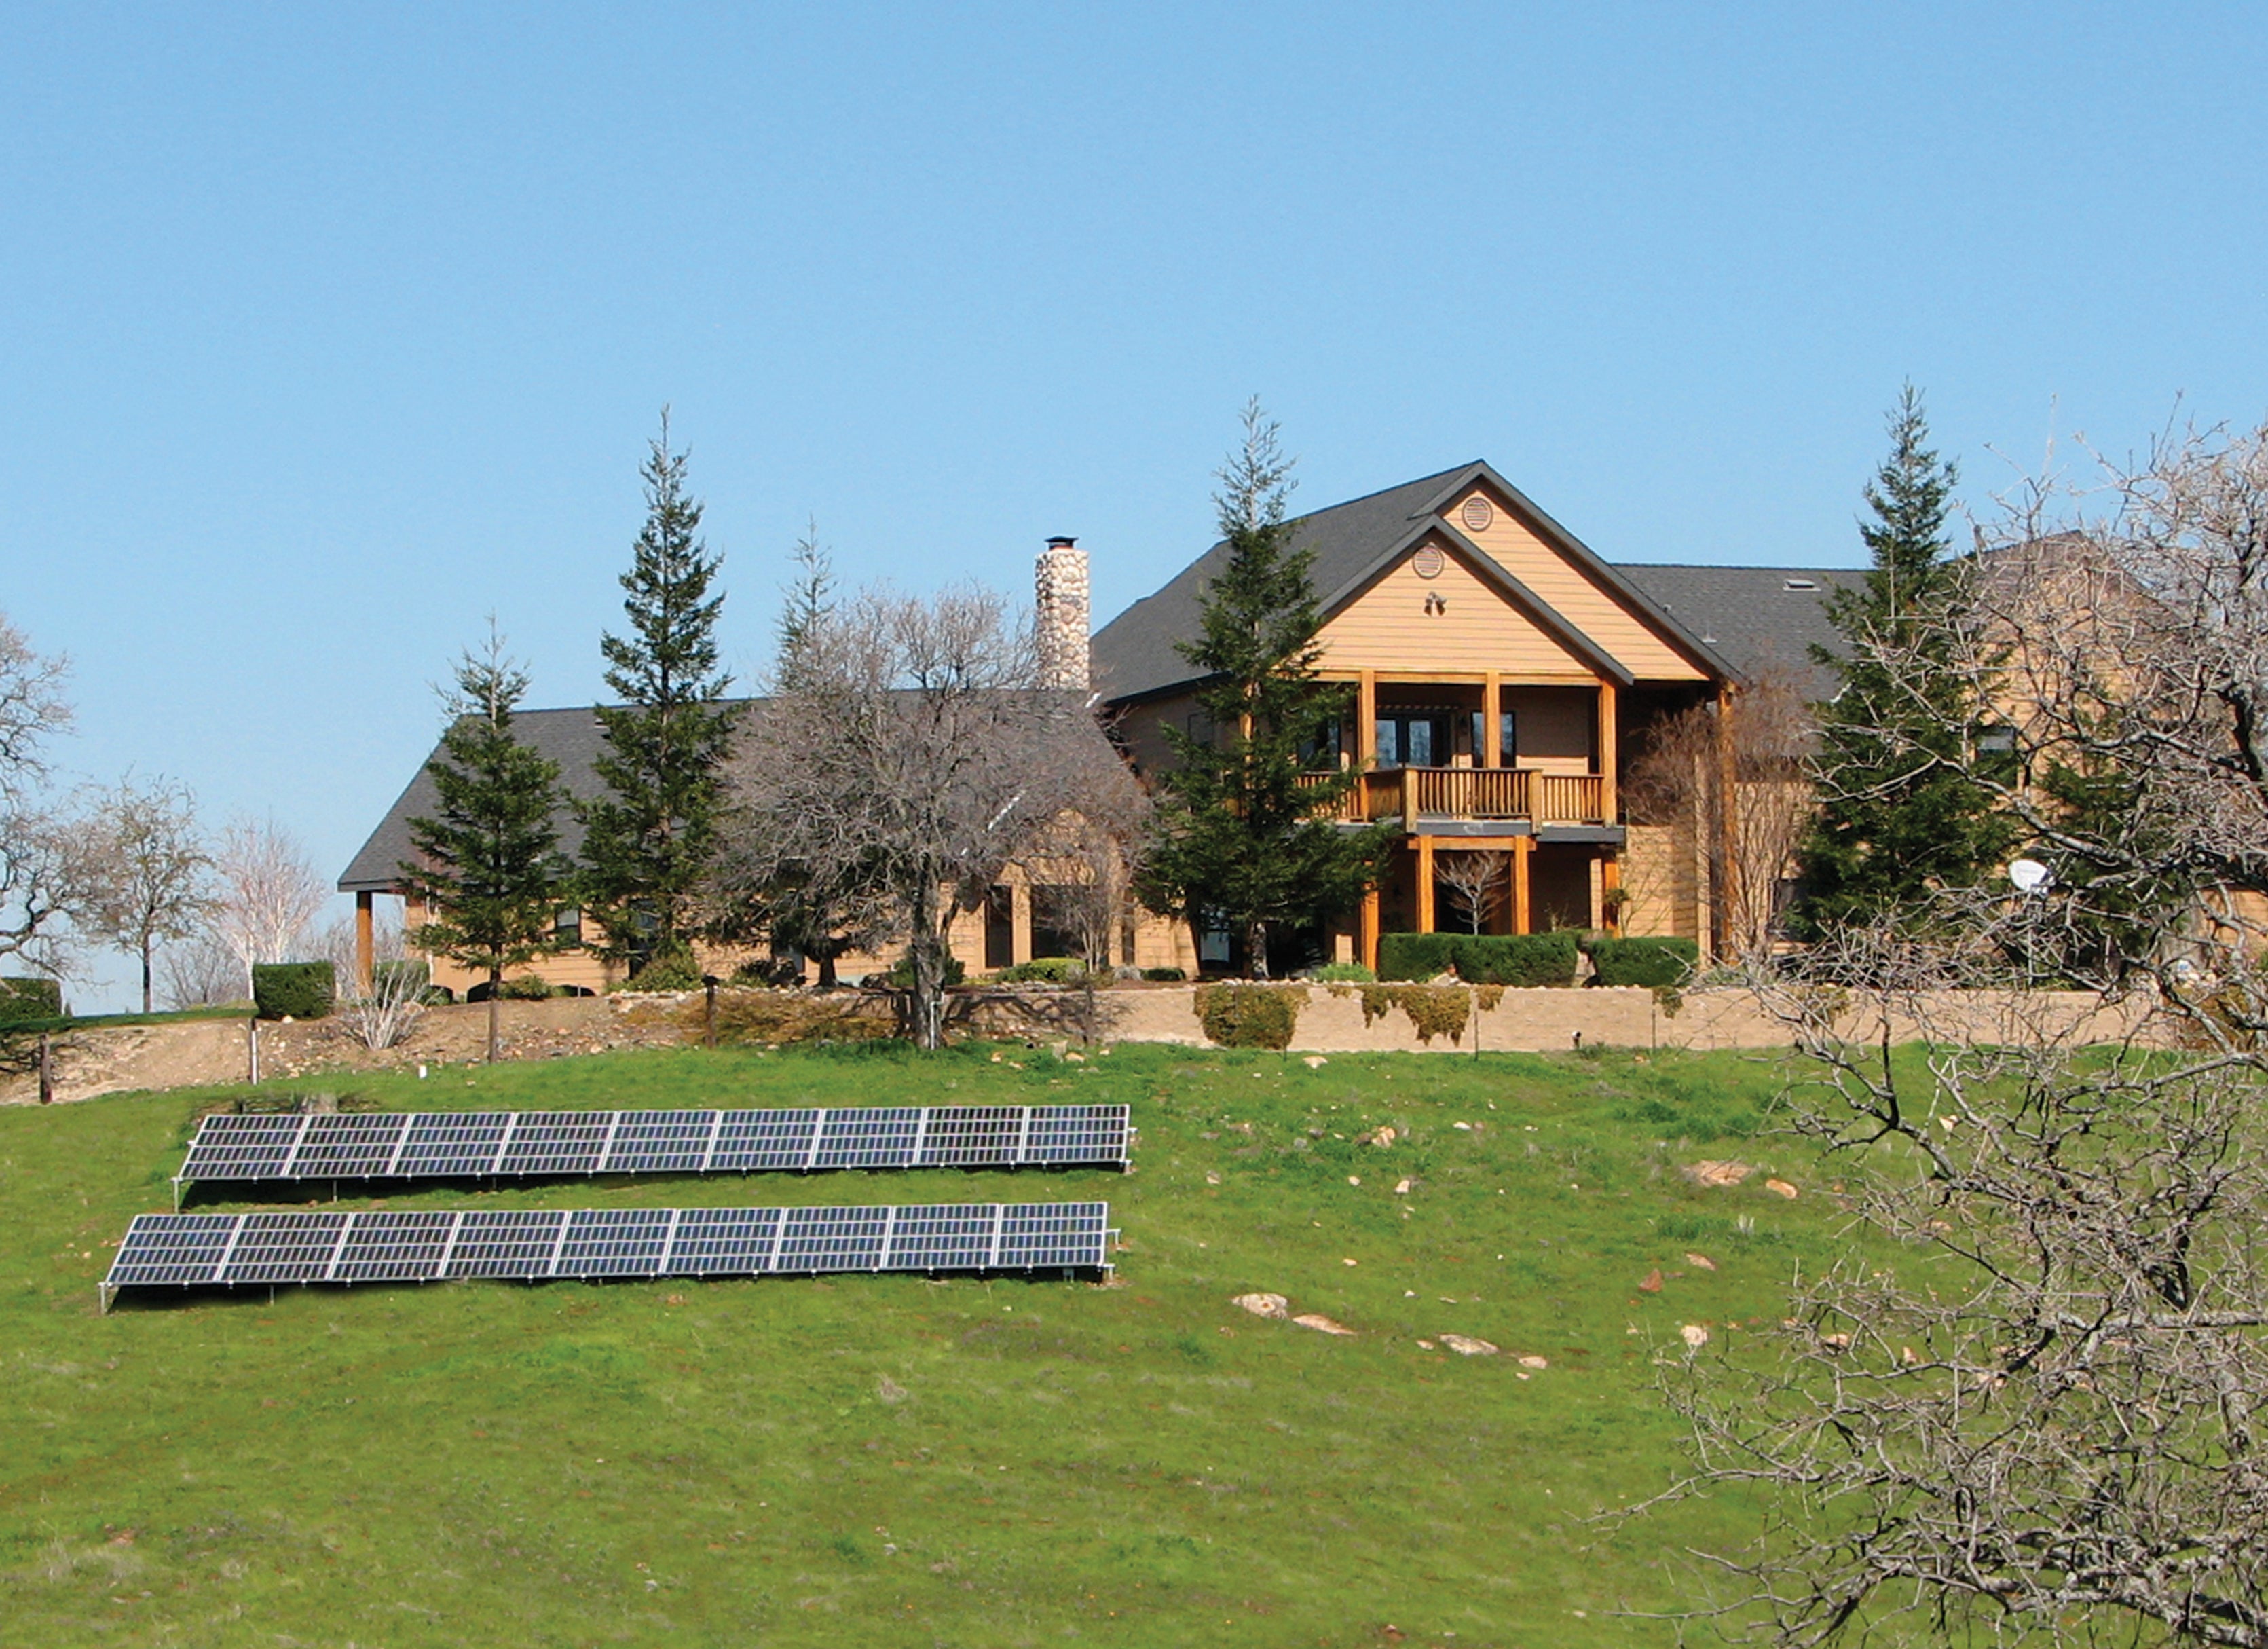 Ground Mounted PV System